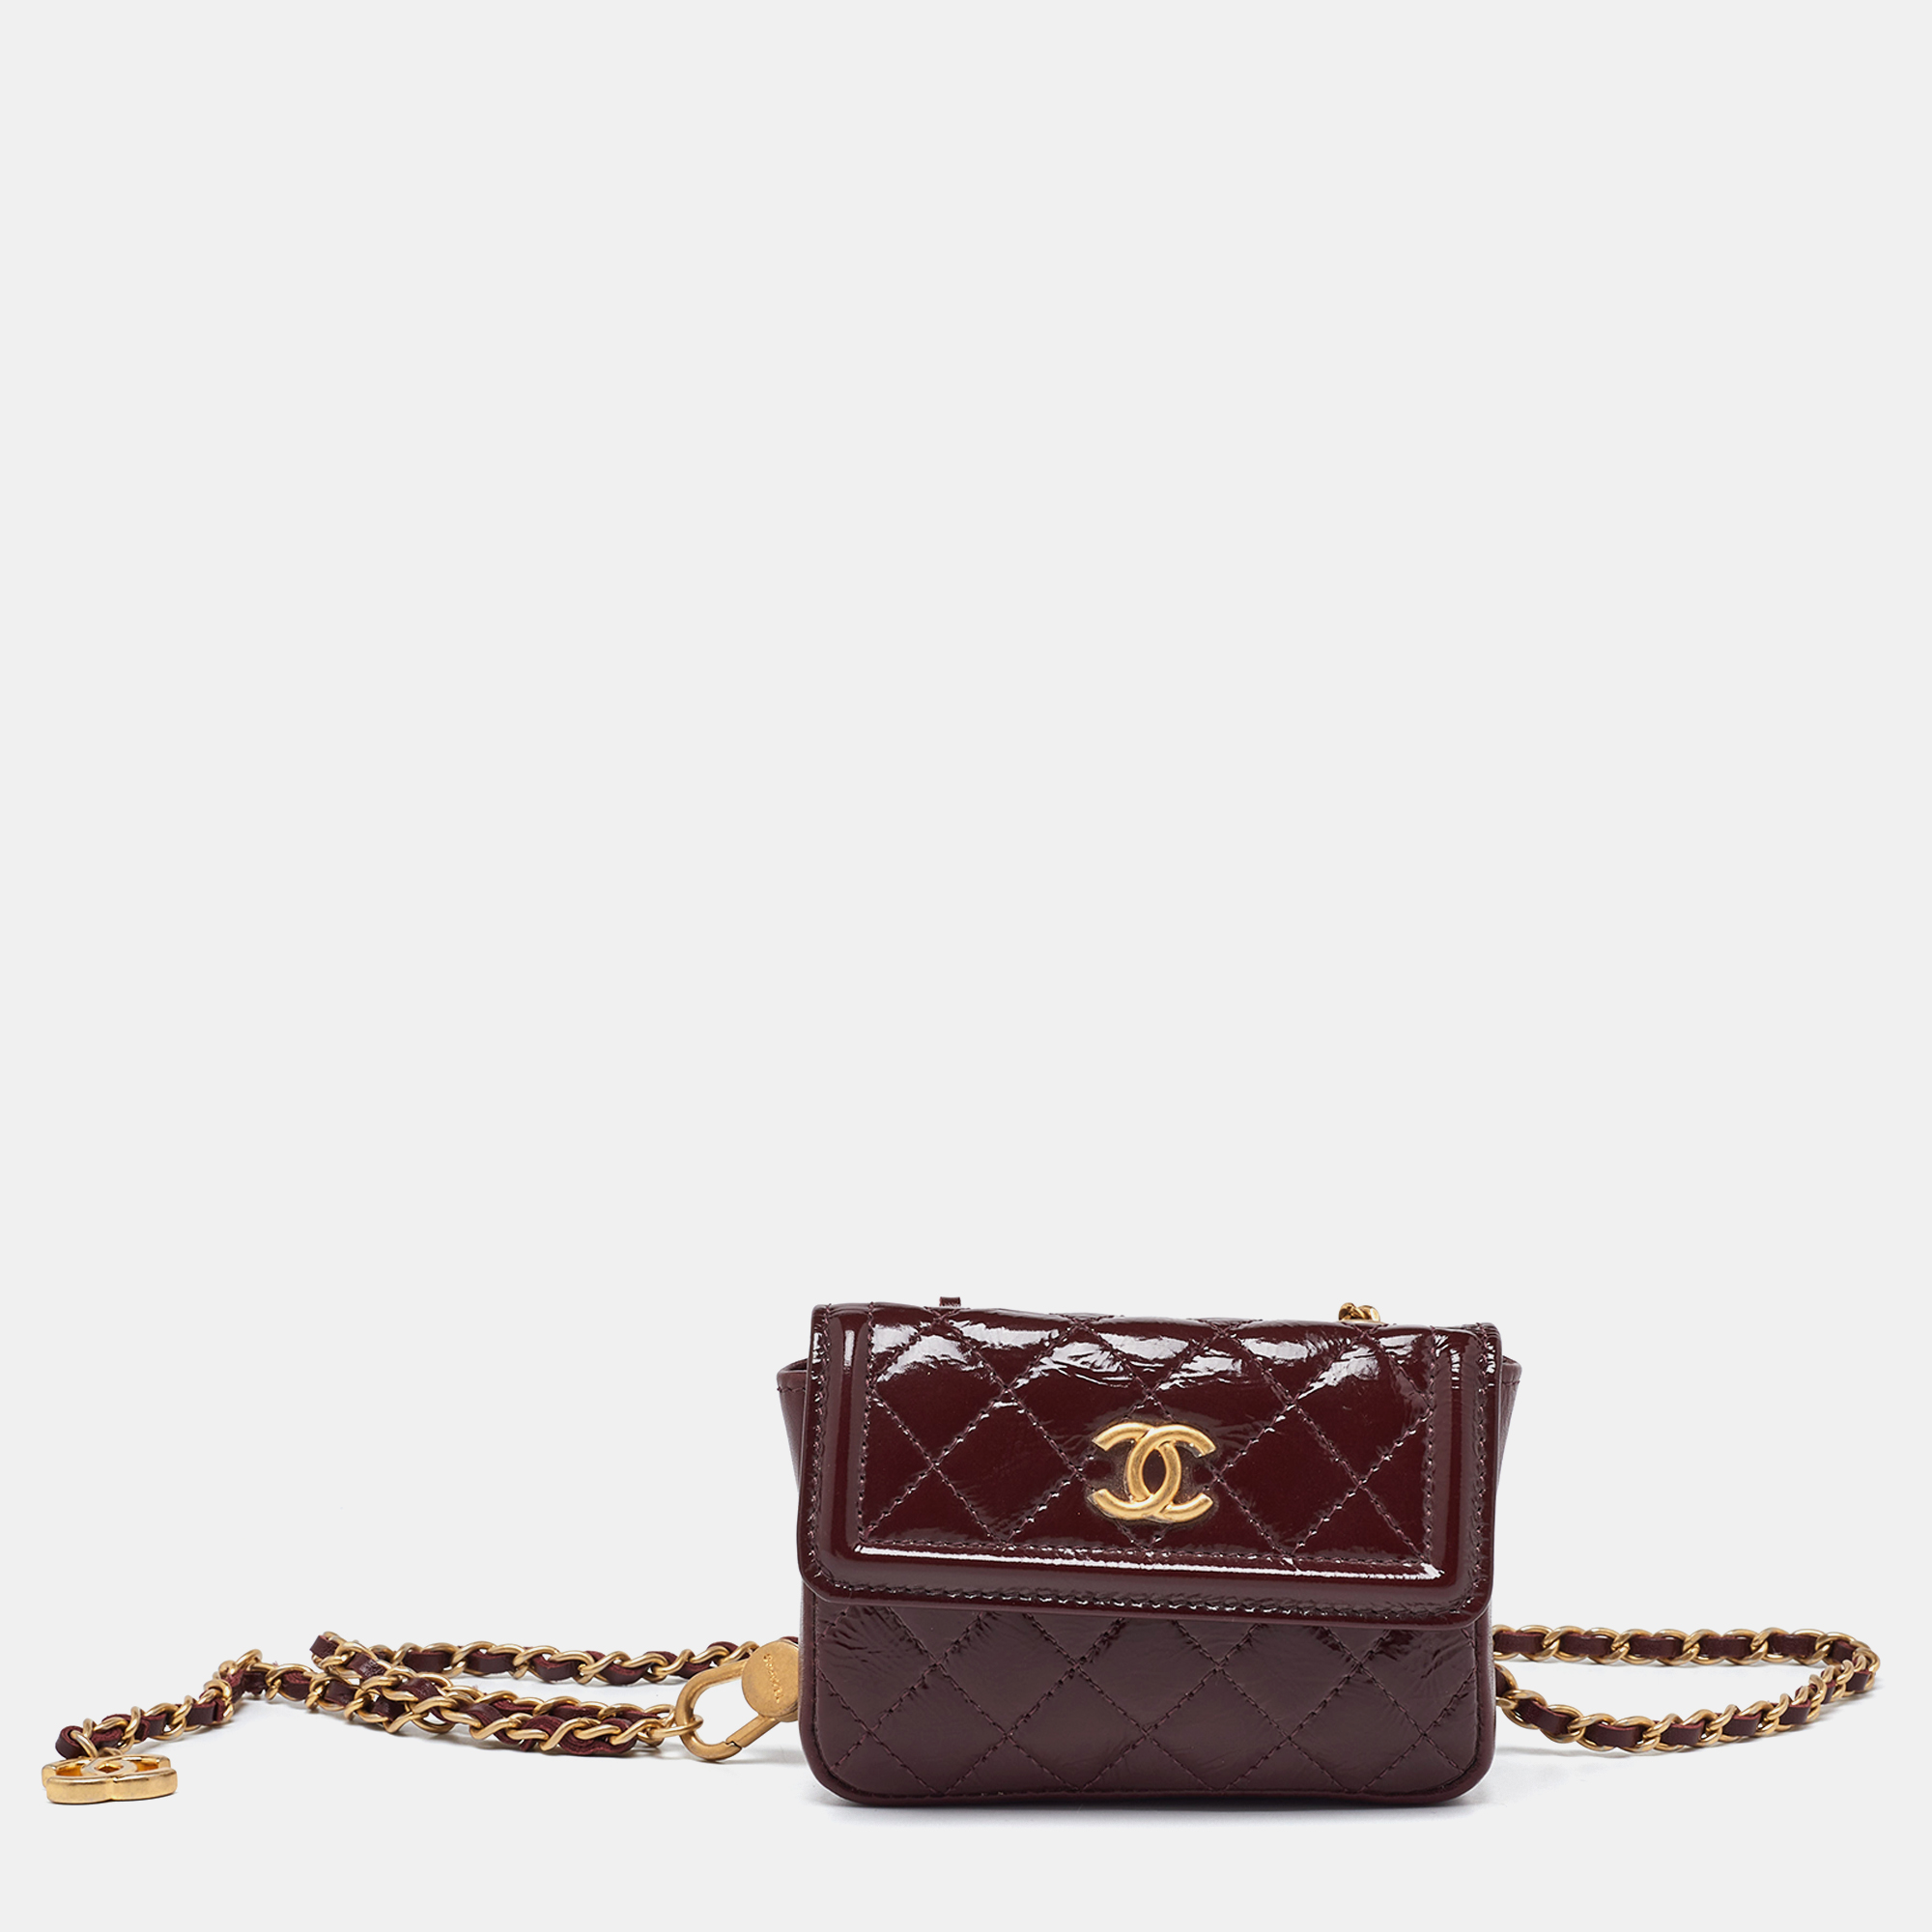 Chanel red quilted patent leather cc mini chain belt bag